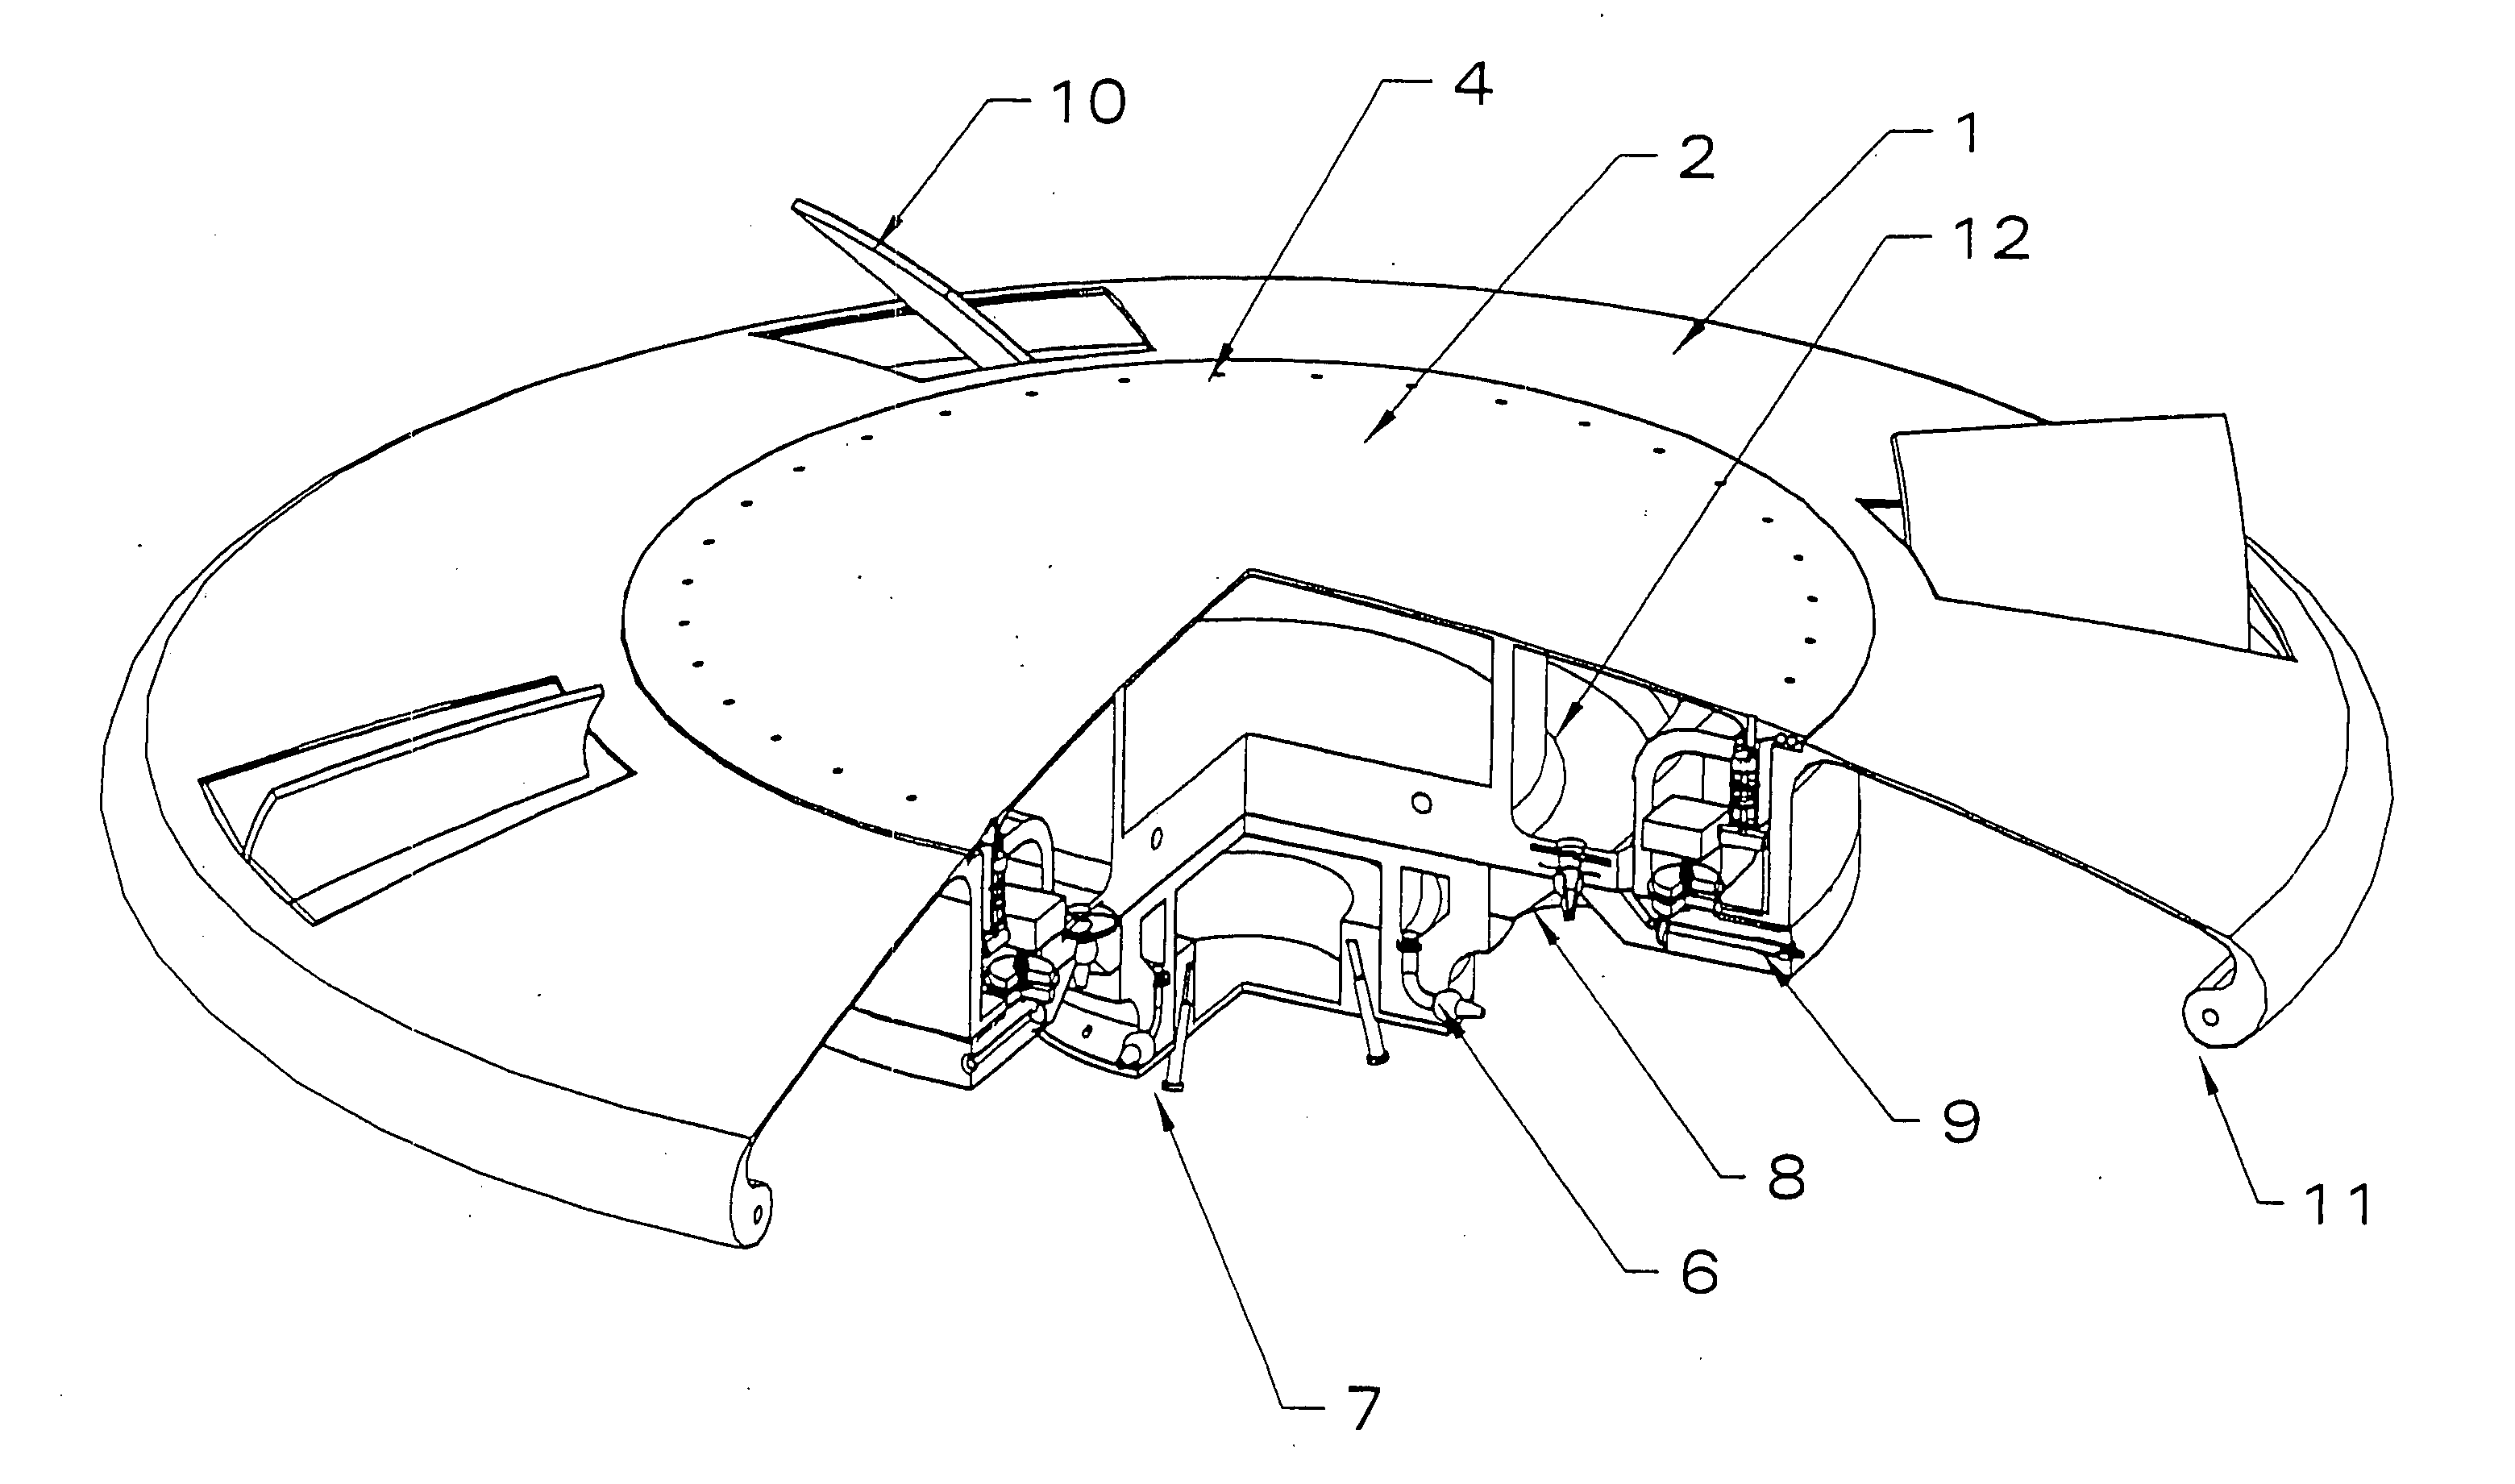 Saucer-shaped gyroscopically stabilized vertical take-off and landing aircraft